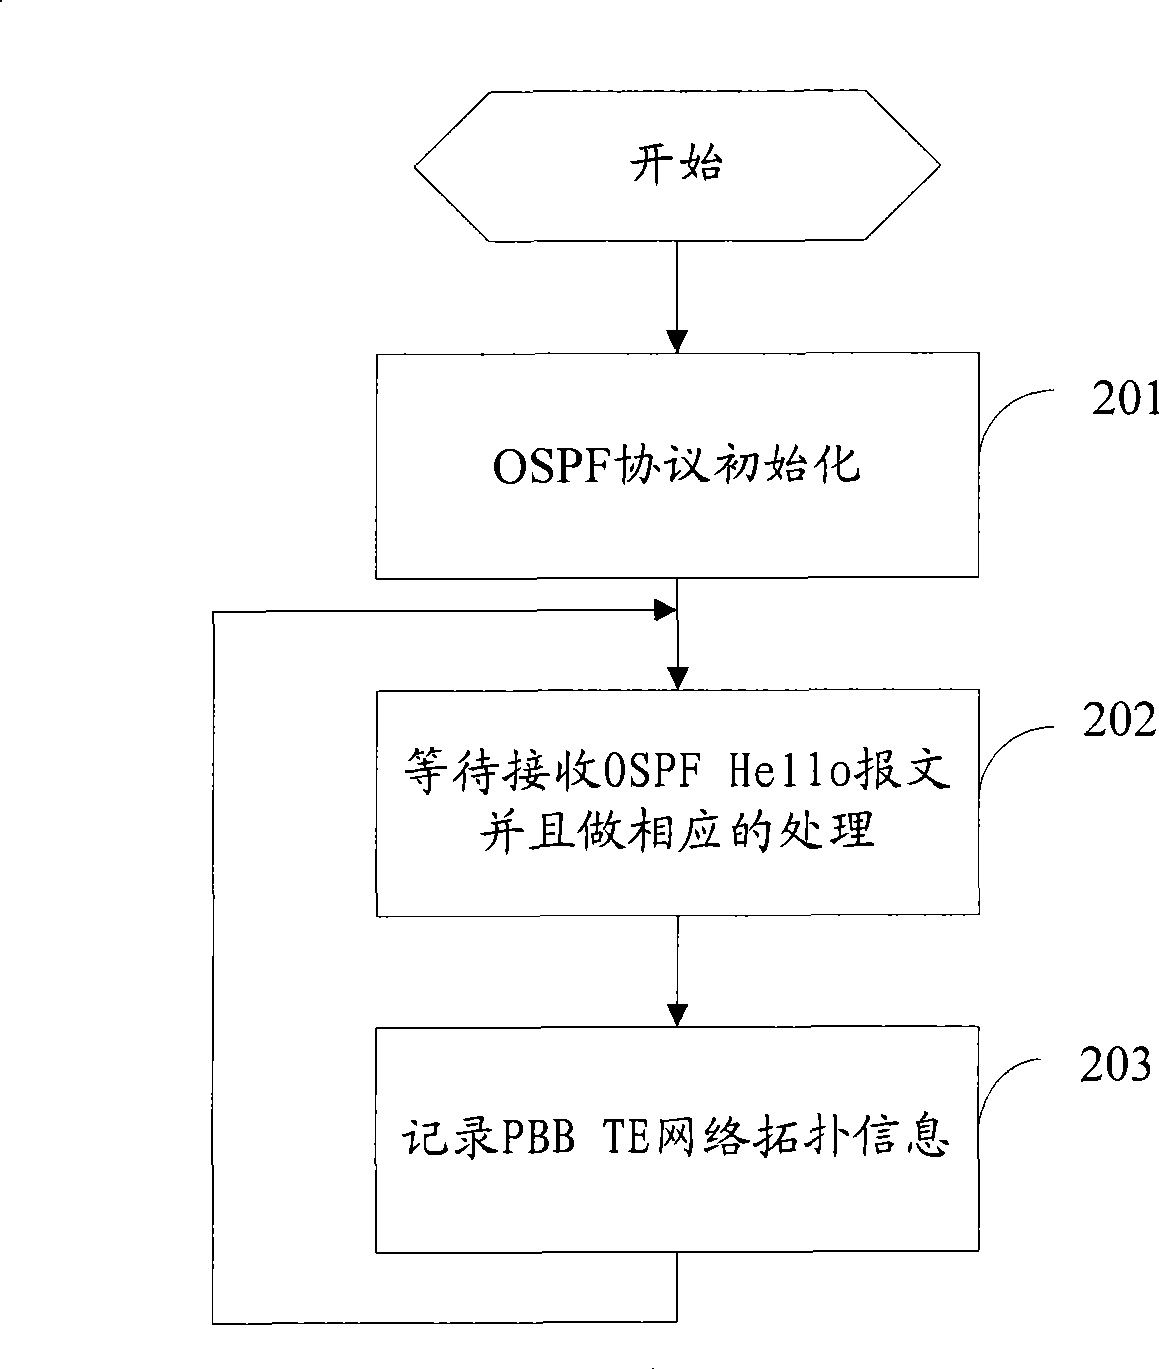 Method and apparatus for automatic topology discovery and resource management in PBB network